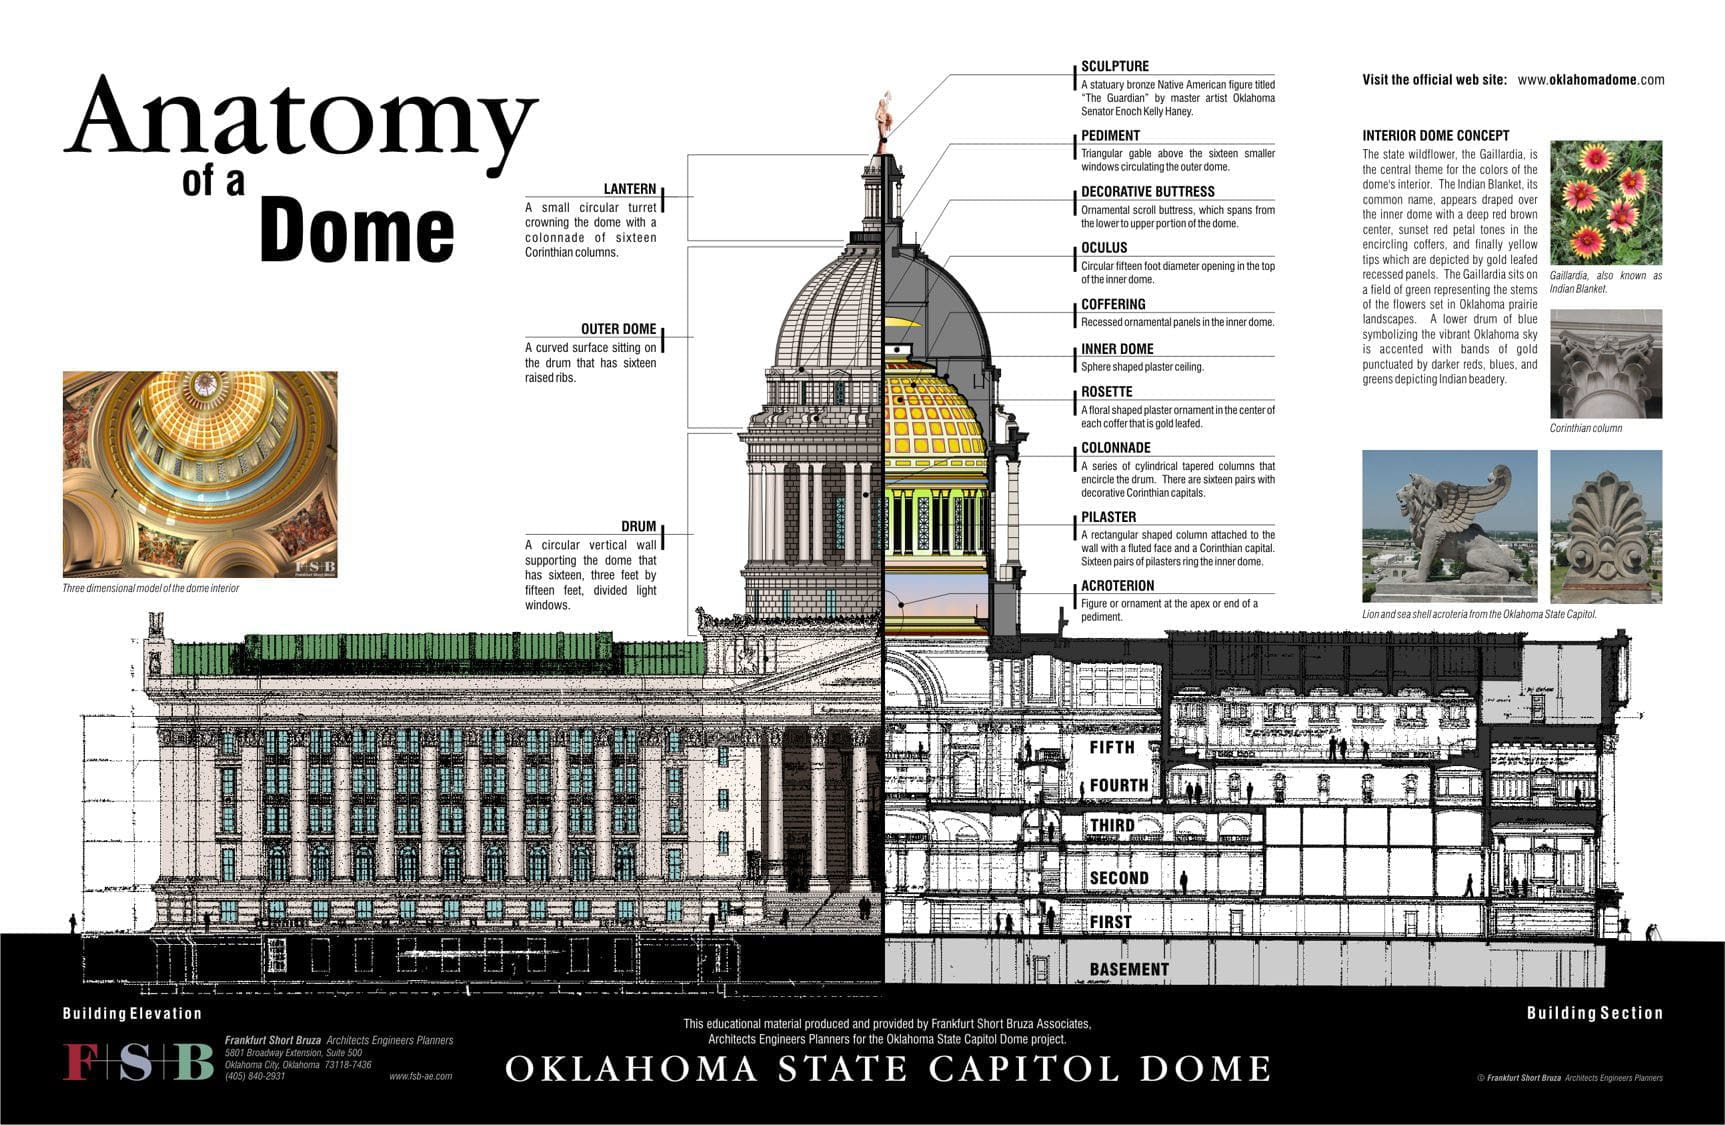 Building Section of the Oklahoma State Capitol and the Interior Dome Design Concept.